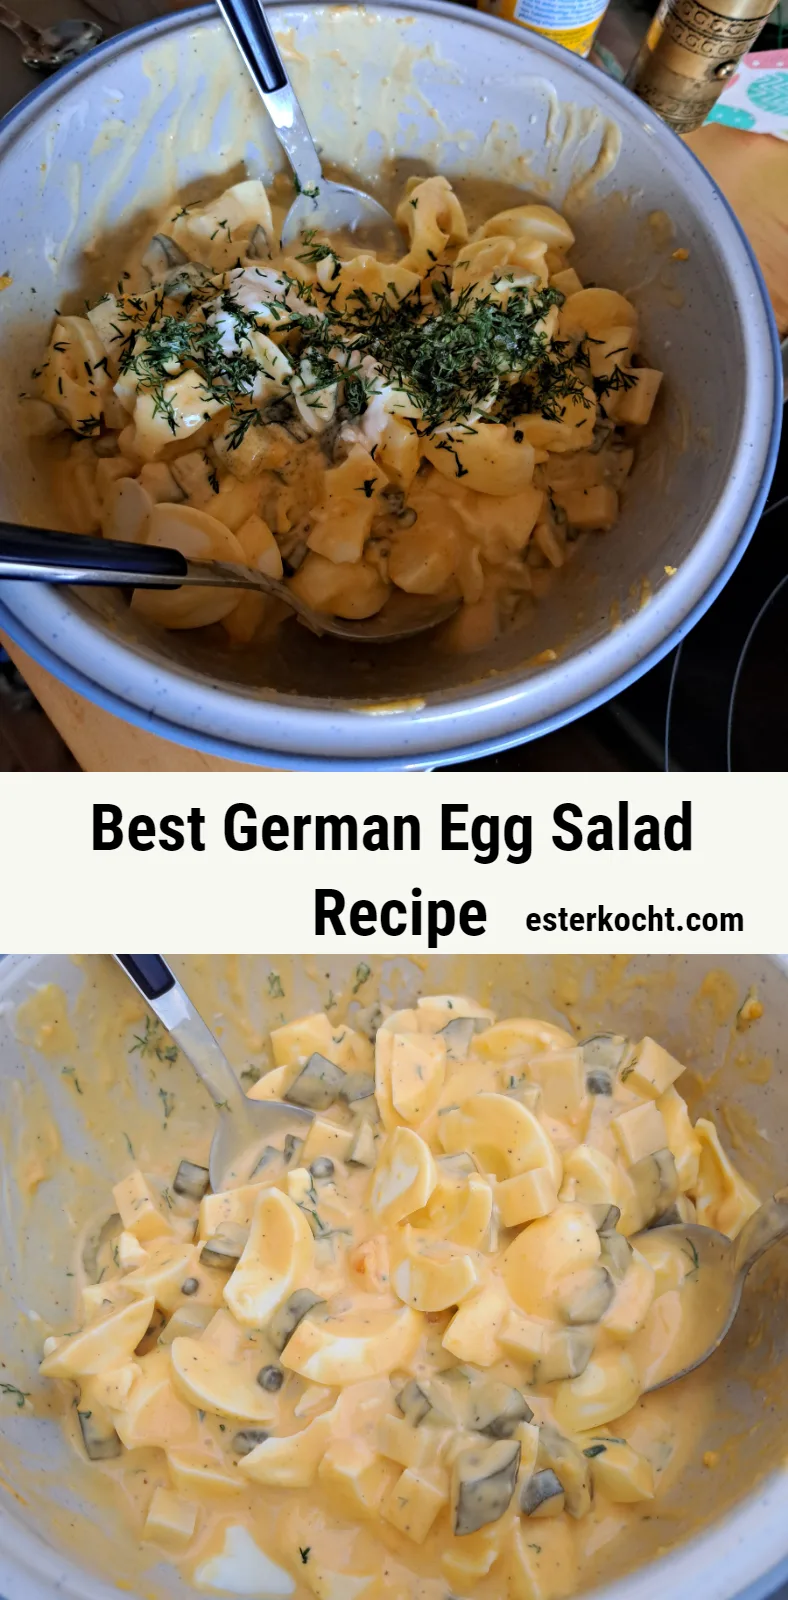 German egg salad with caperns, dill, pickles, pickle brine and hard-boiled eggs.